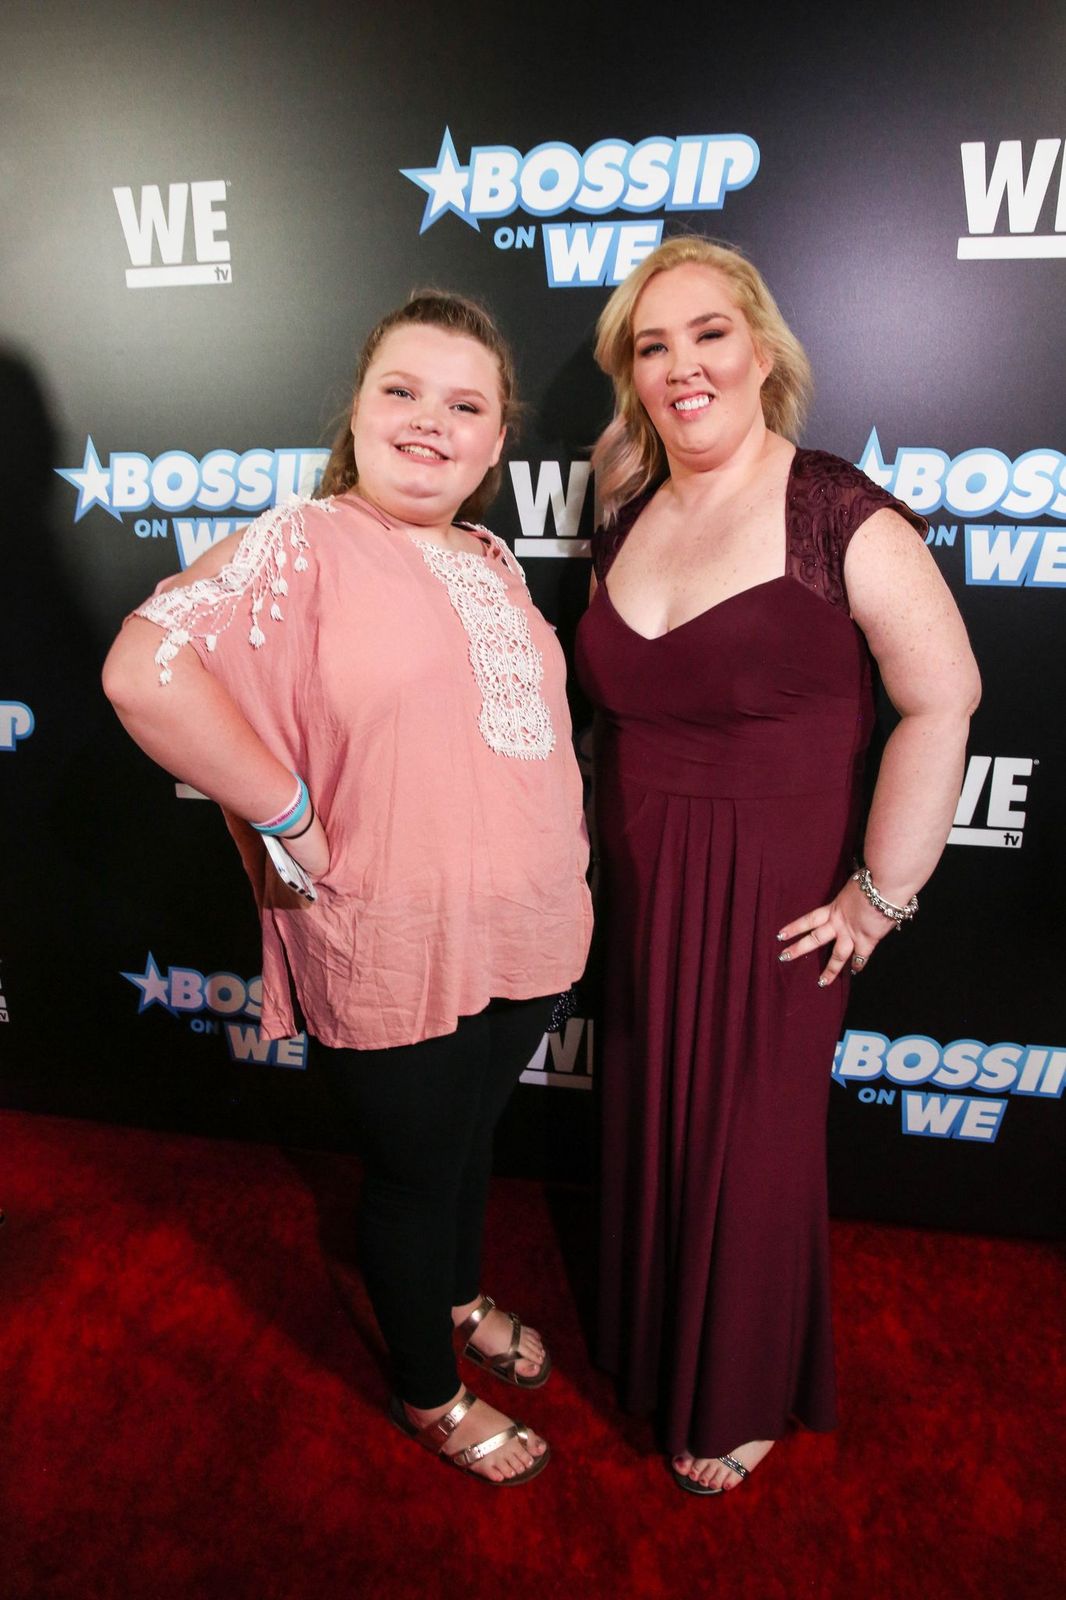 Alana Thompson "Honey Boo Boo" and June Shannon "Mama June" at the 2nd Annual Bossip "Best Dressed List" event in 2018 in Los Angeles | Source: Getty Images